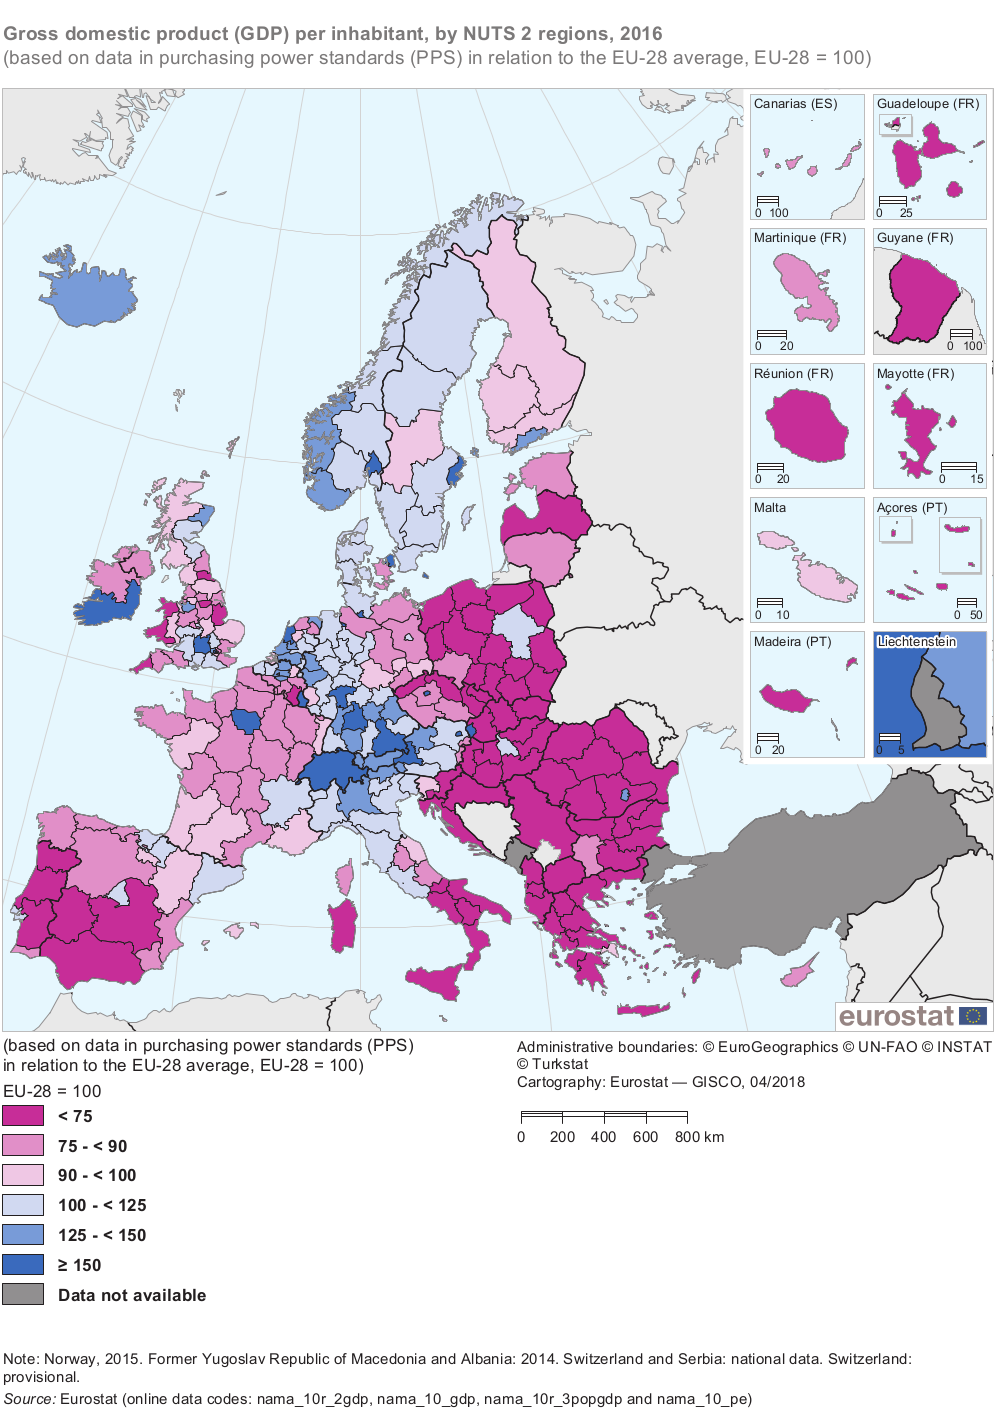 Gross_domestic_product_%28GDP%29_per_inhabitant_in_purchasing_power_standards_%28PPS%29_in_relation_to_the_EU-28_average%2C_by_NUTS_2_regions%2C_2015.png